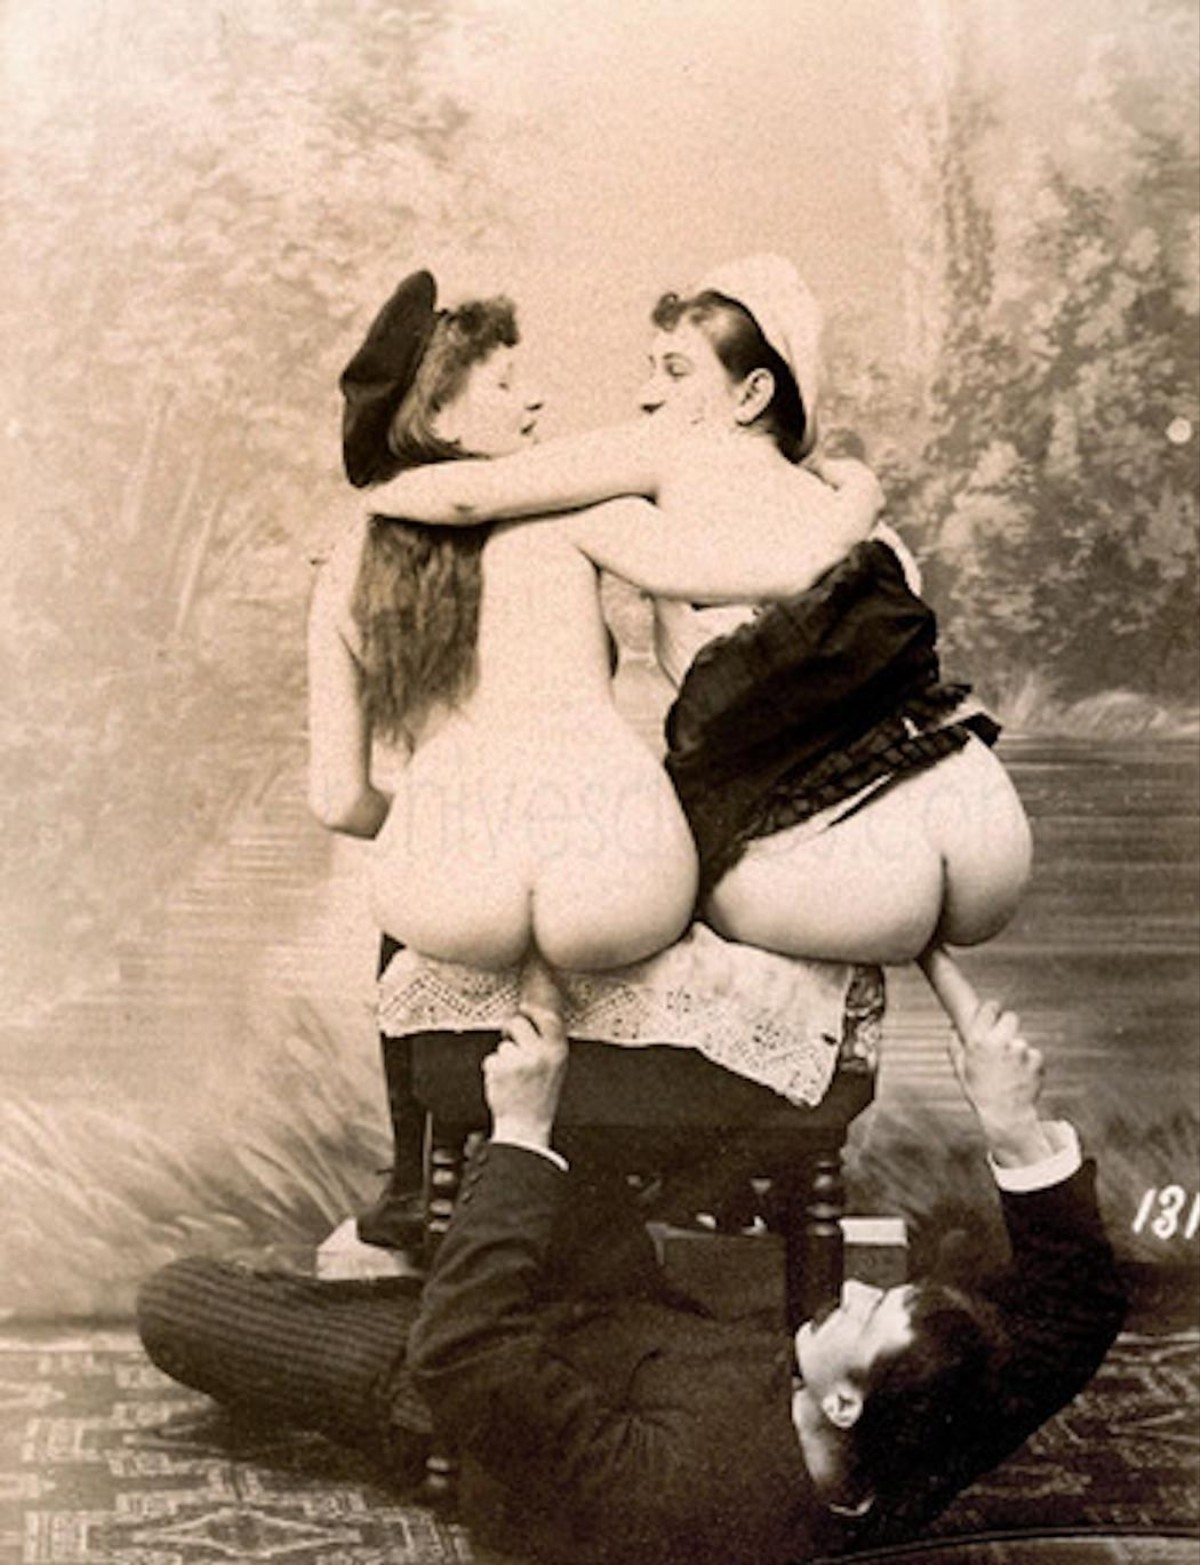 19th Century Porn Illustrations - The Unbridled Joy of Victorian Porn